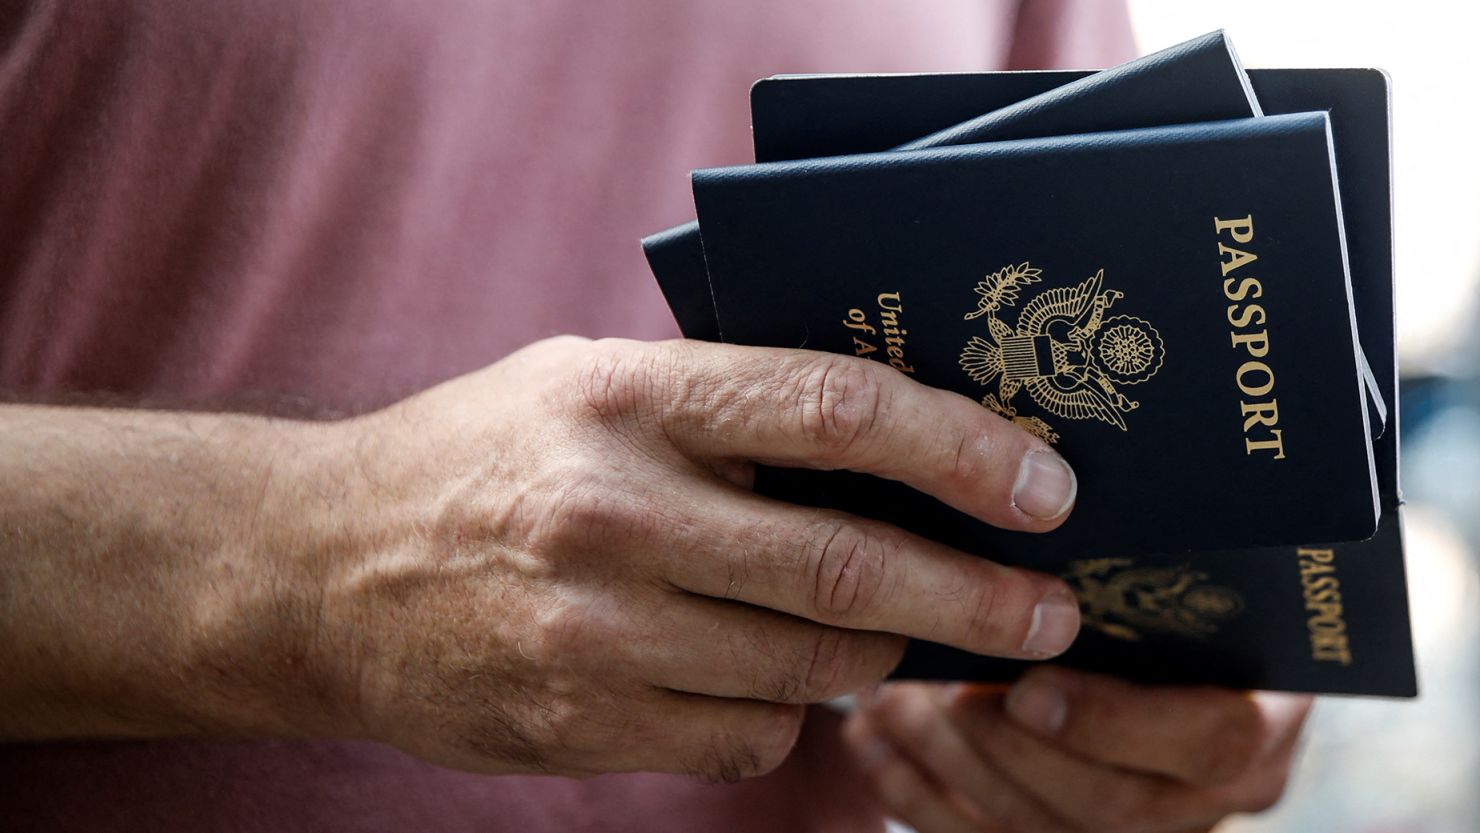 There are more than 160 million valid US passports in circulation, according to the US State Department.